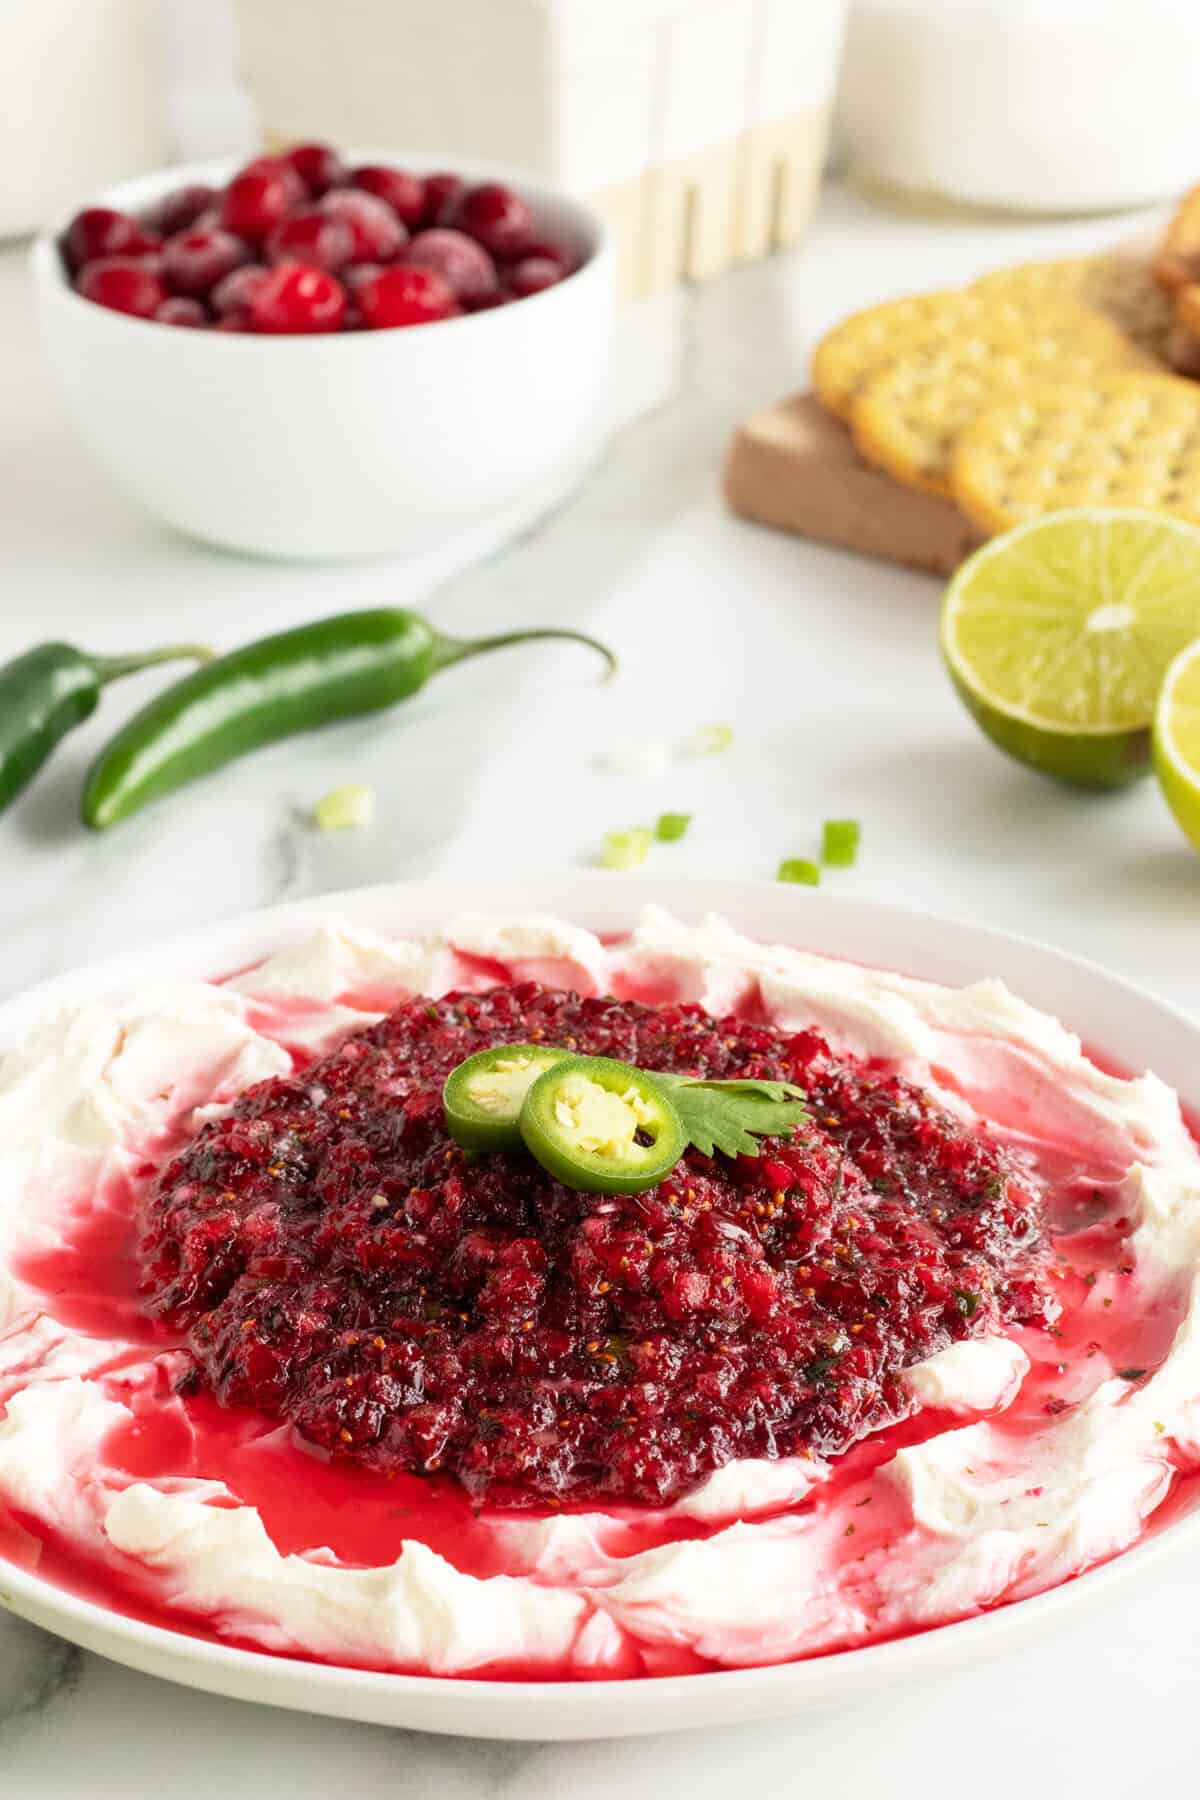 cranberry jalapeno dip on cream cheese on a white plate